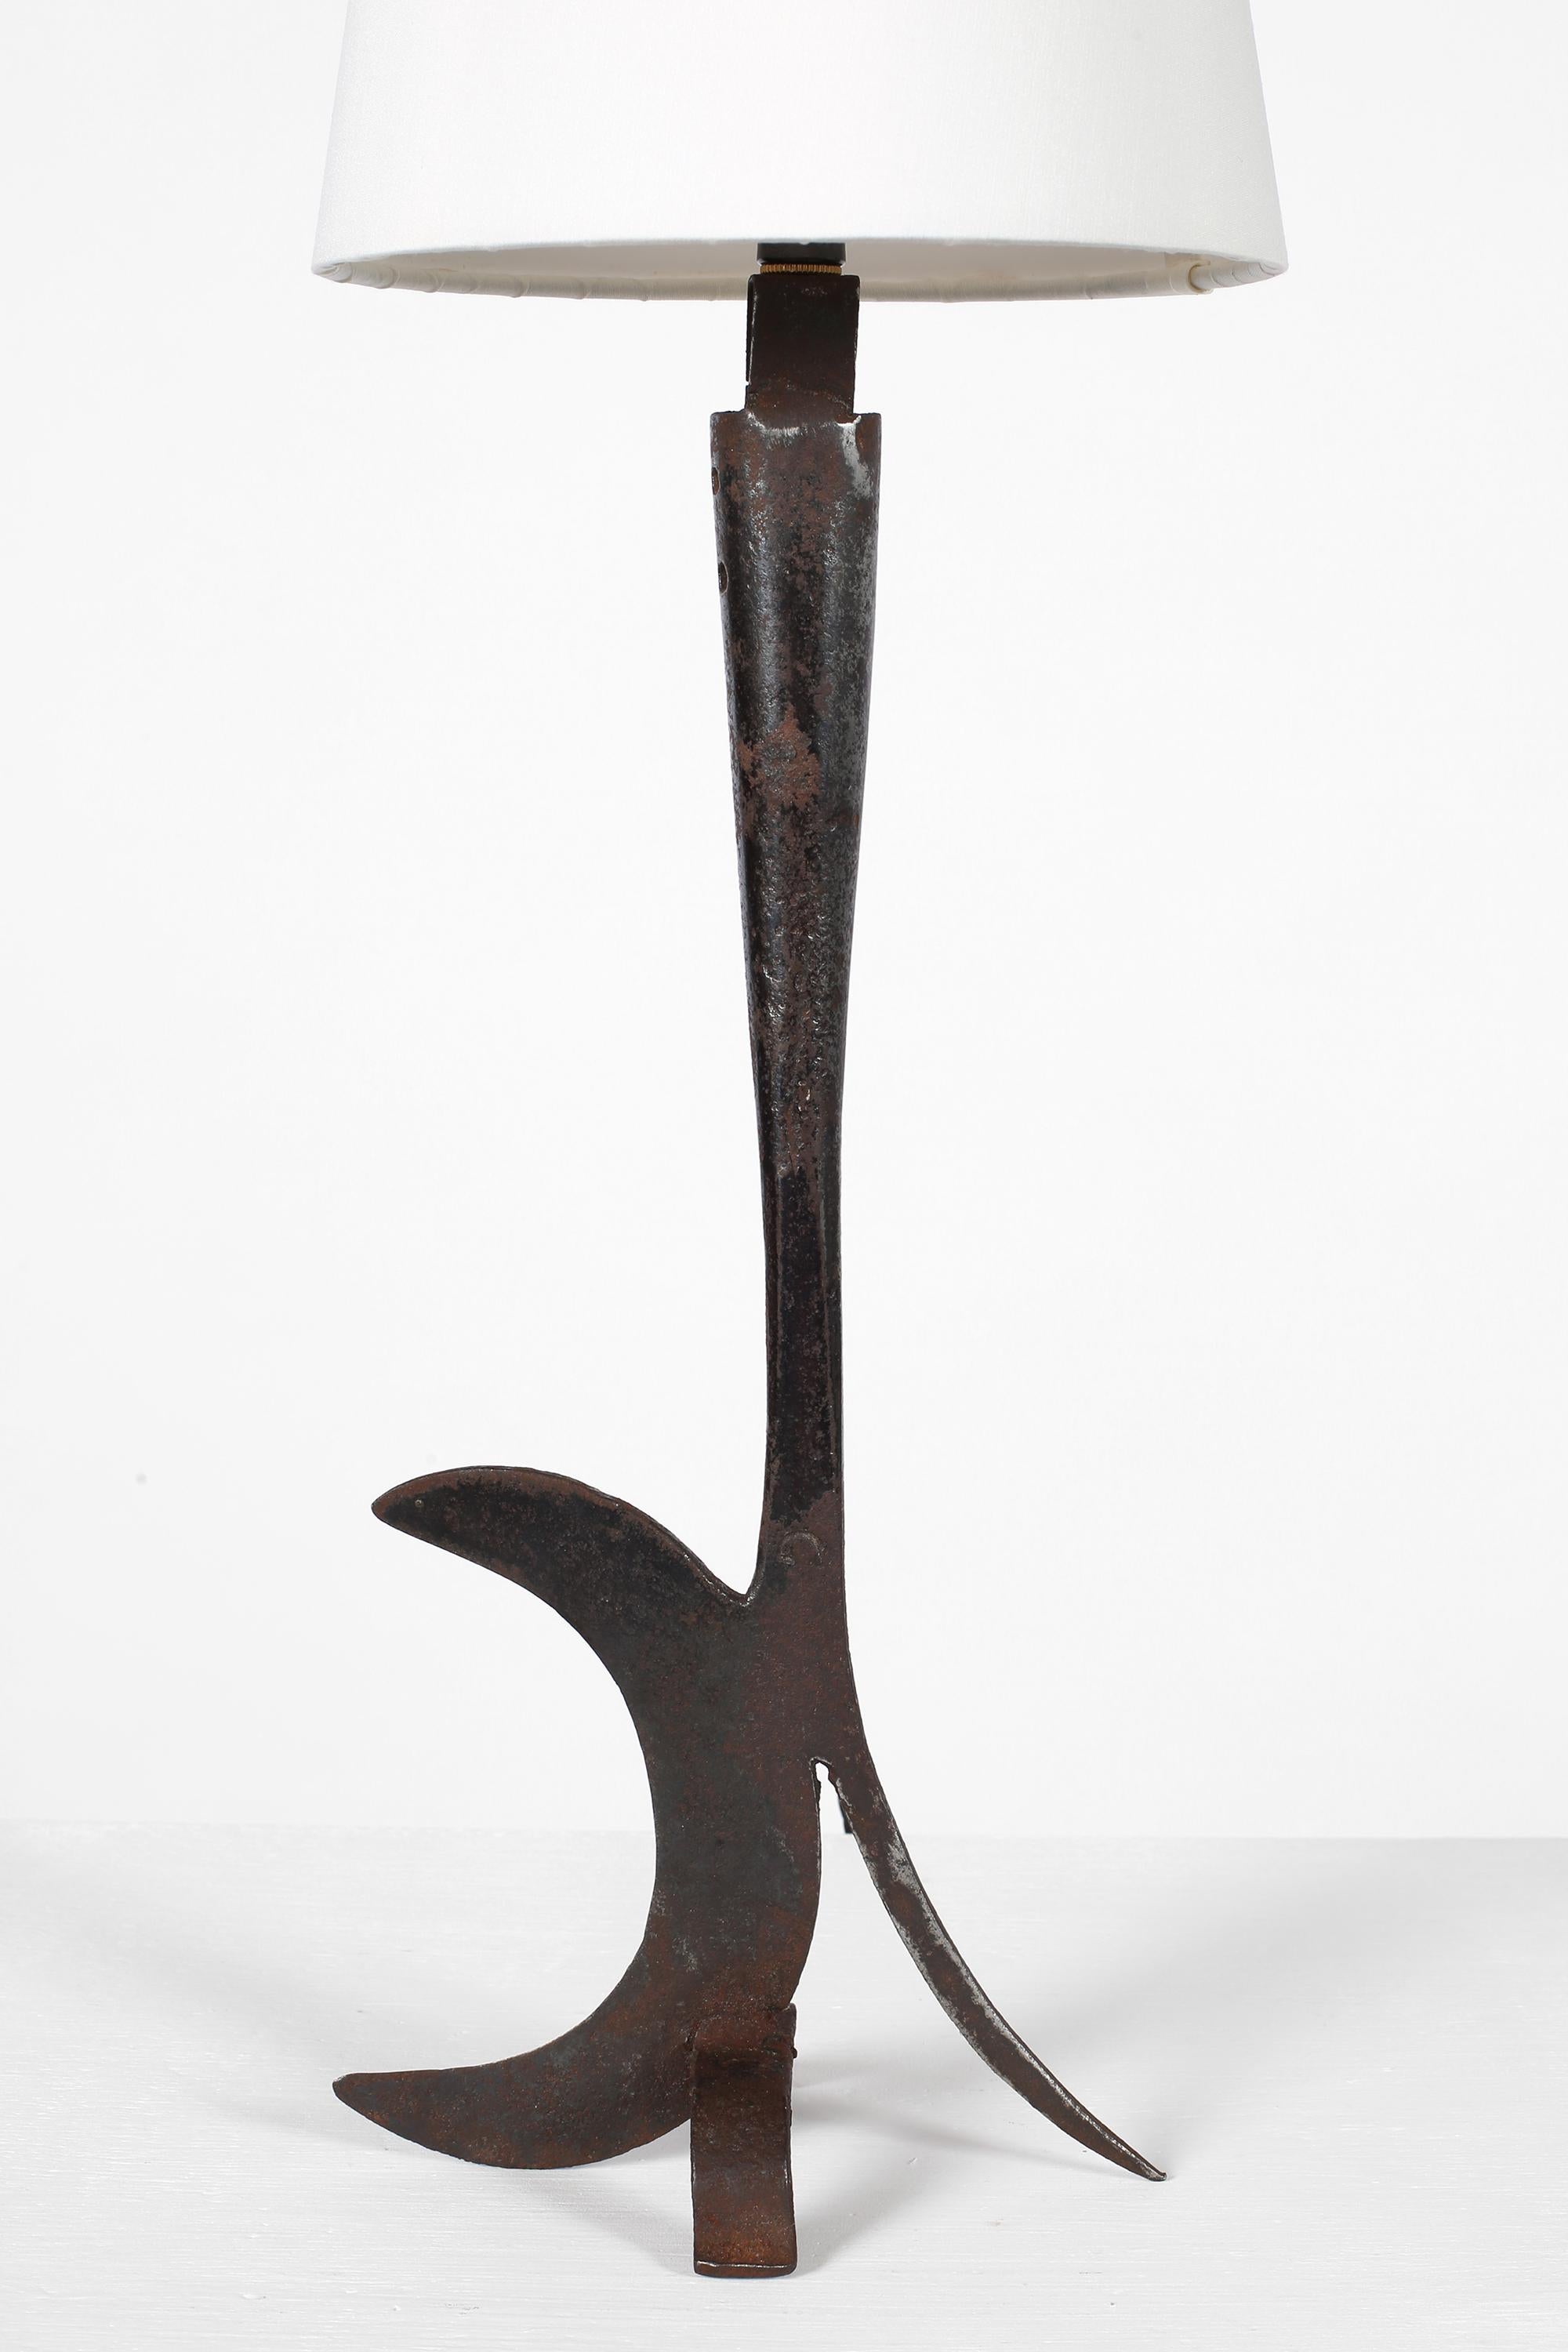 French Midcentury Folk Art Brutalist Abstract Forged Iron Table Lamp In Good Condition For Sale In London, GB